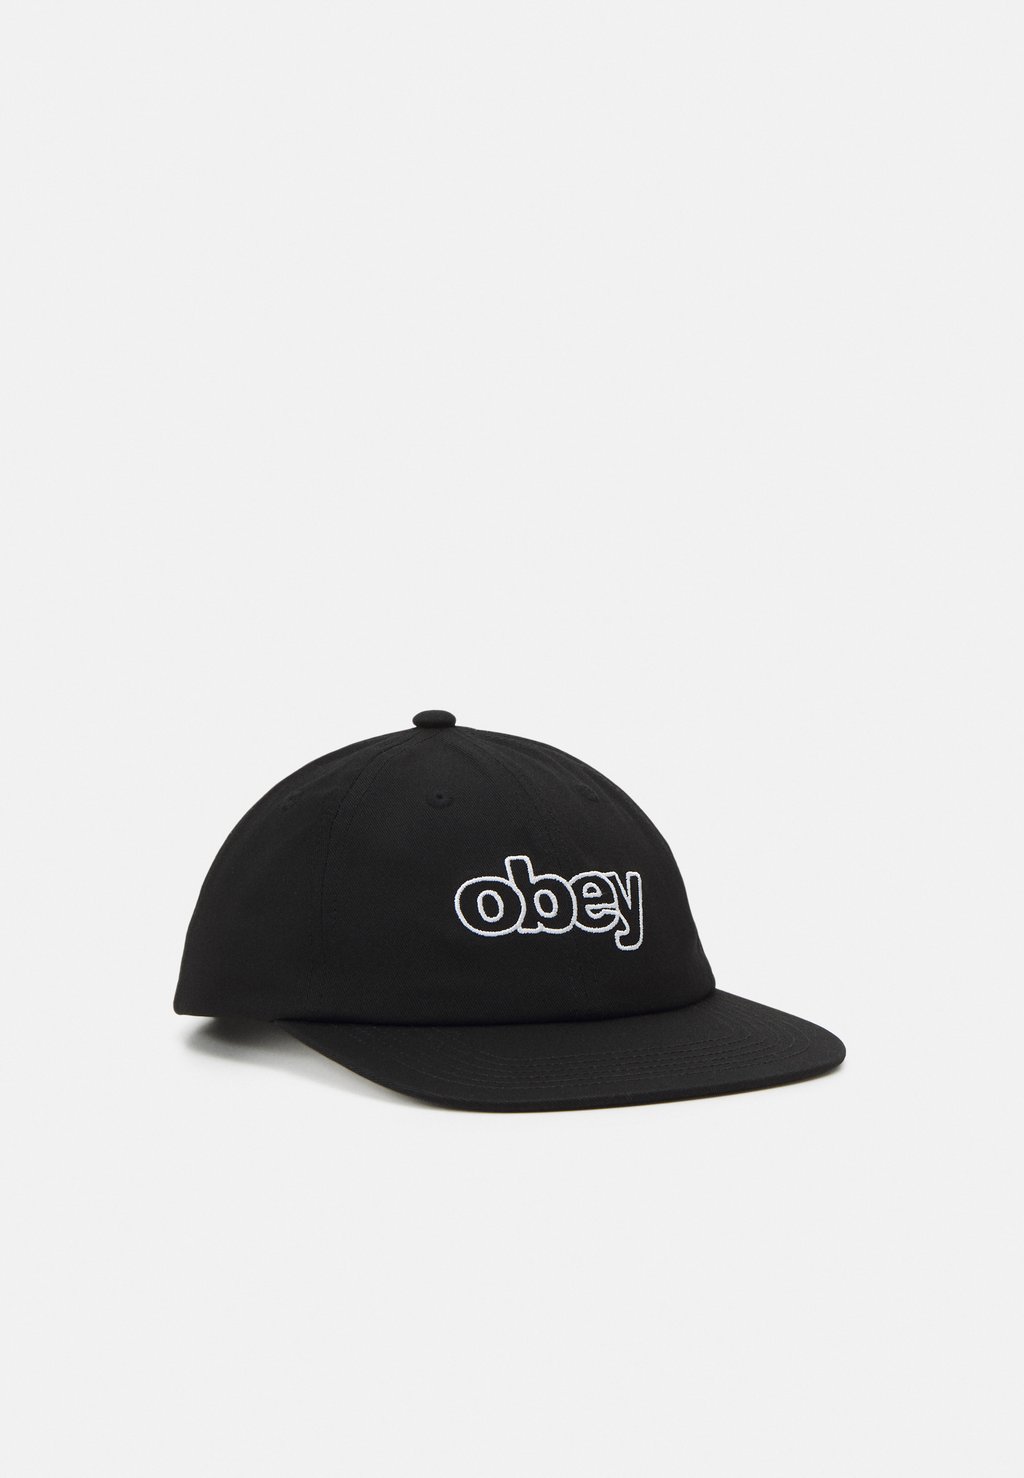 Кепка Obey Clothing OBEY SELECT 6 PANEL SNAPBACK, черный кепка obey clothing flower 6 panel strapback черный